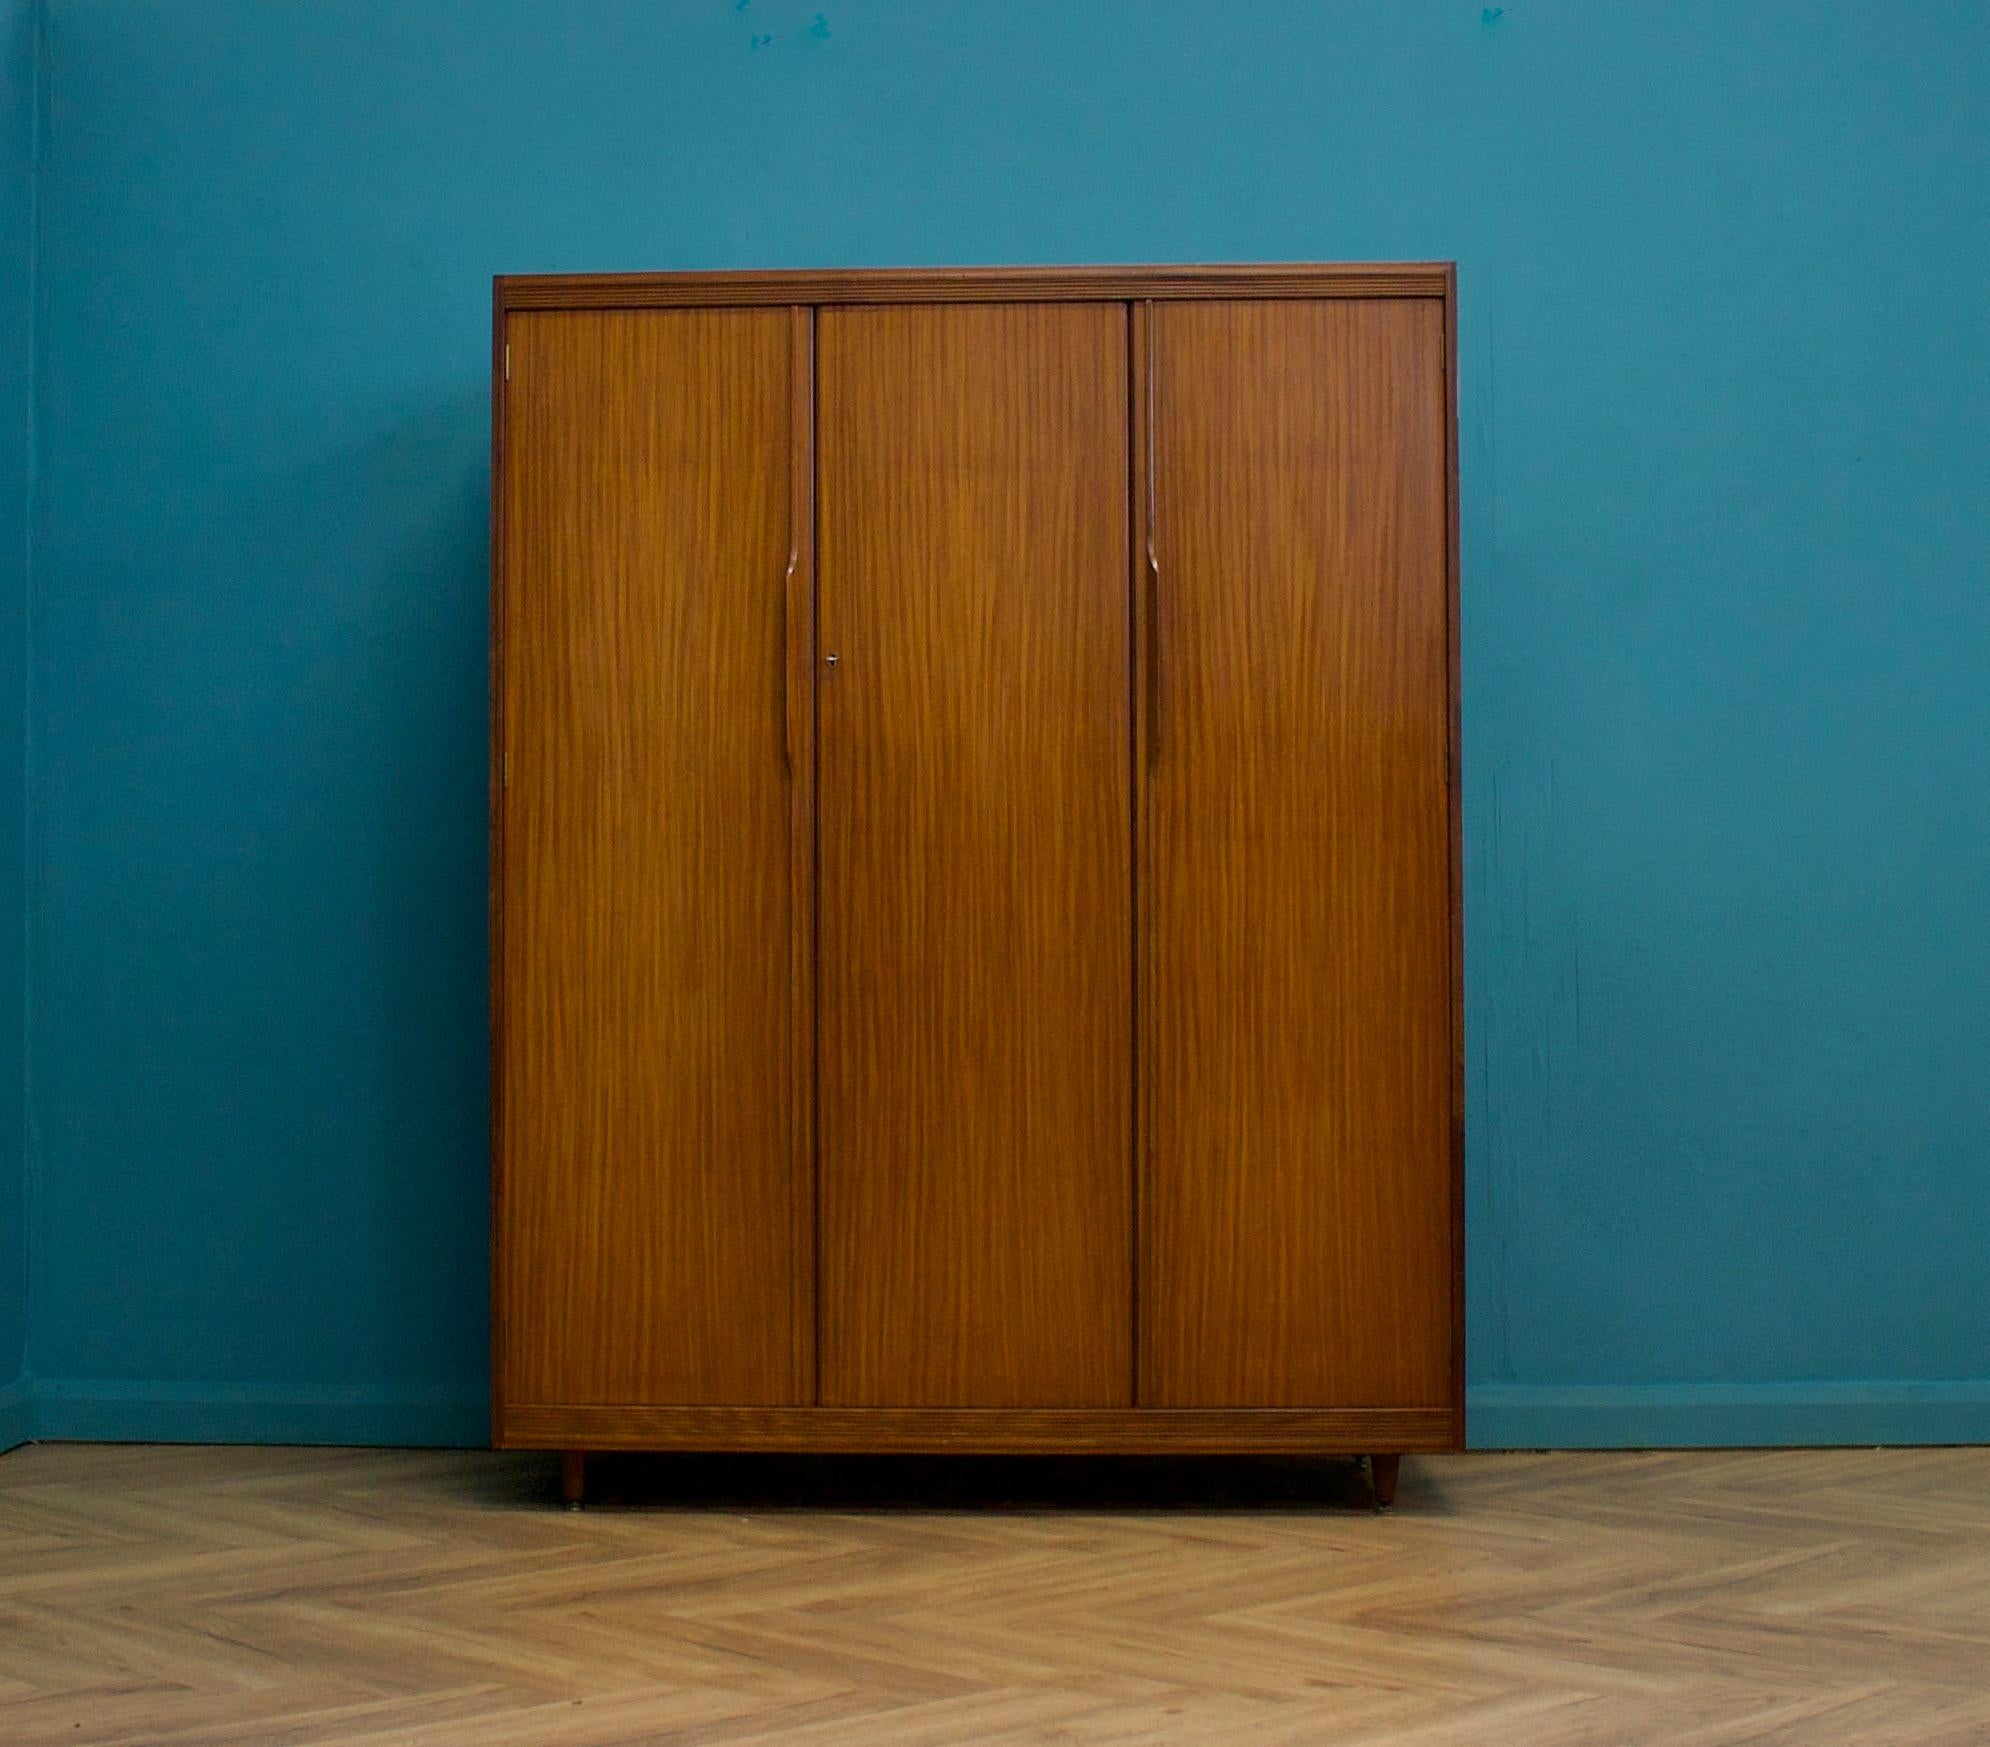 A freestanding three door teak wardrobe from White & Newton- in the Danish modern style
Made during the 1960s

Fitted out with a clothes rail, drawers, a compartment and shelving for ample storage in such a compact piece
The style of this wardrobe